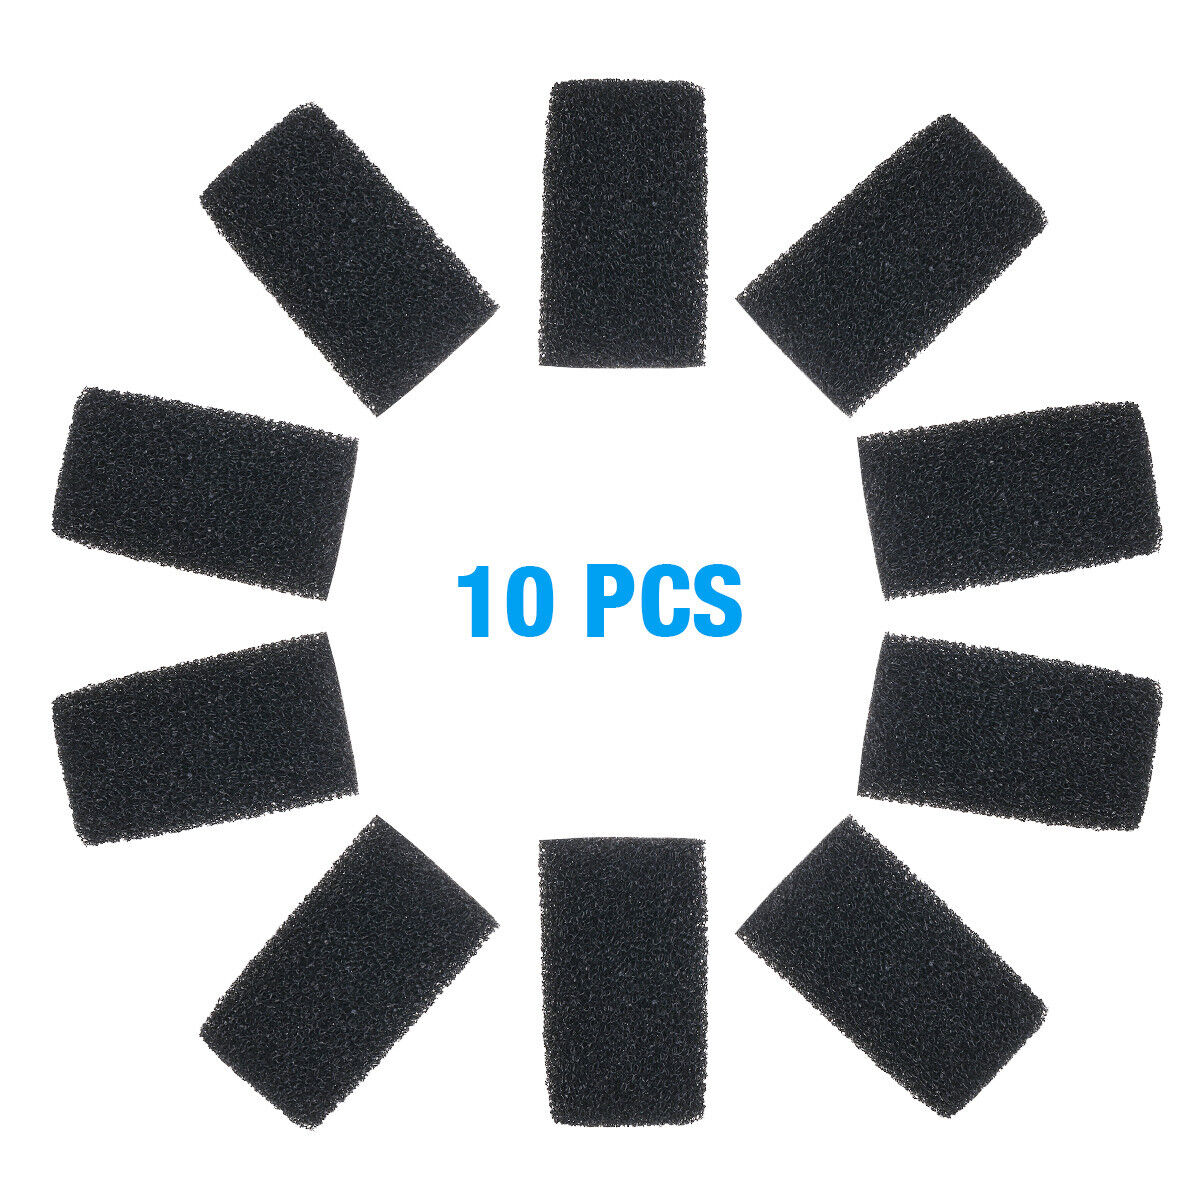 10PCS Pool Cleaner Sweep Tail Hose Scrubber for Polaris 180 280 360 380 91003105 Unbranded - фотография #11